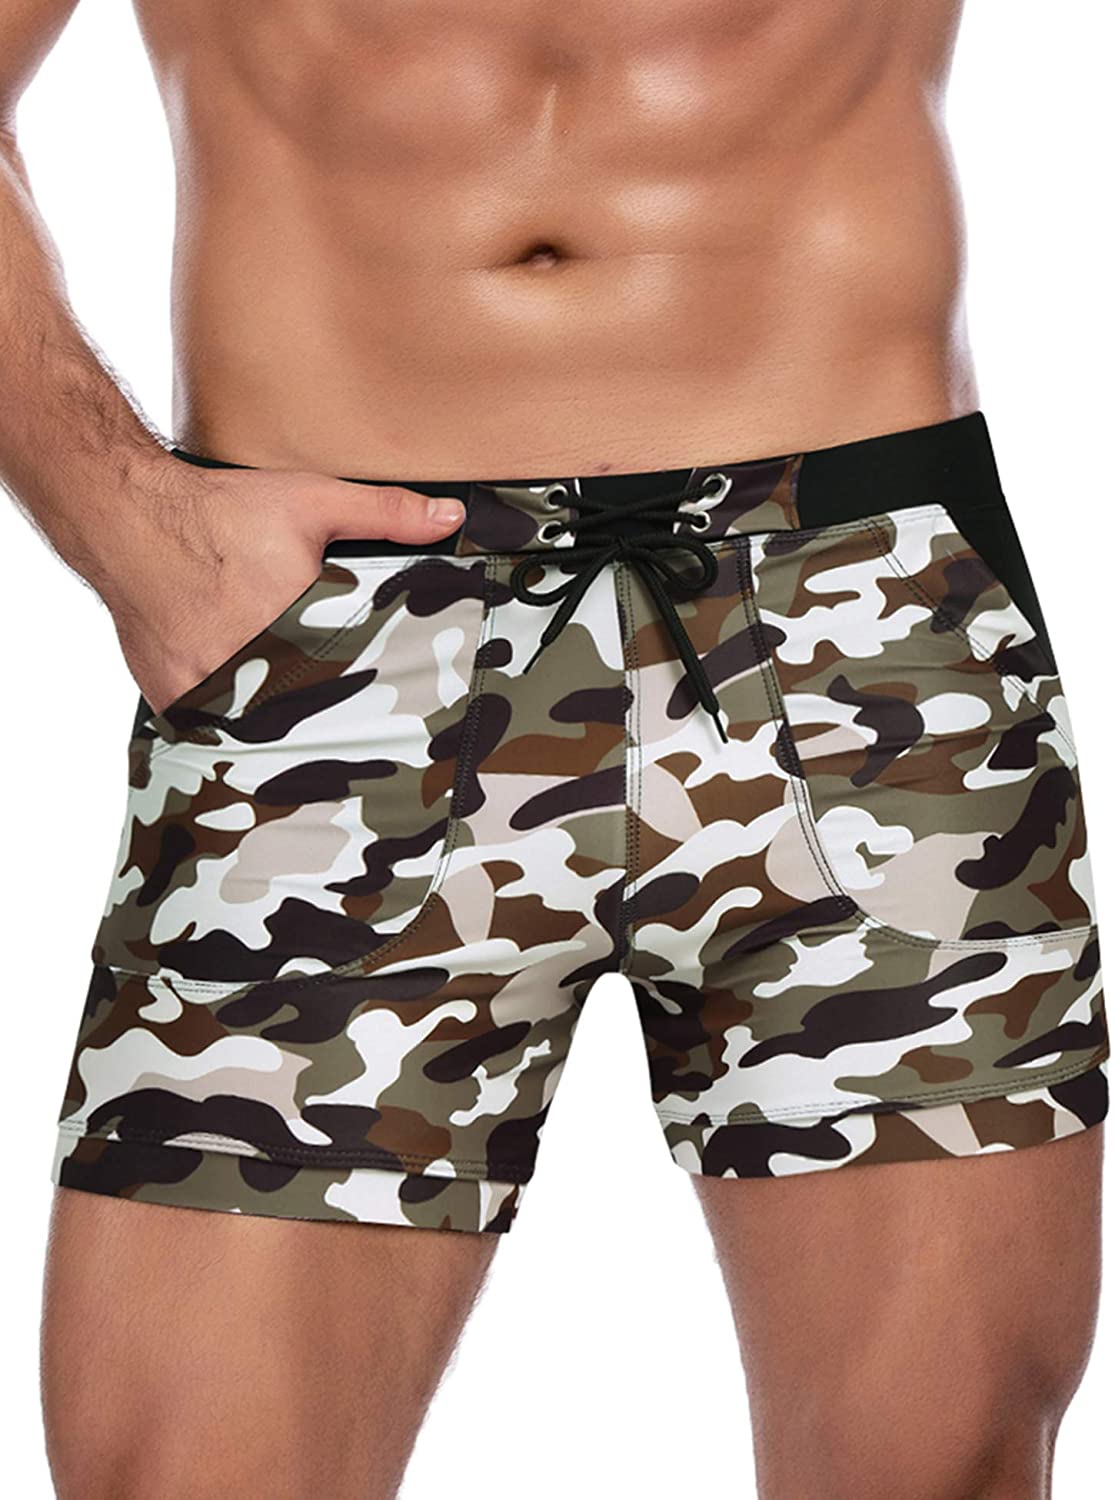 COOFANDY Men's Swimsuit Camo Quick Dry Mens Swimming Shorts Trunks with ...